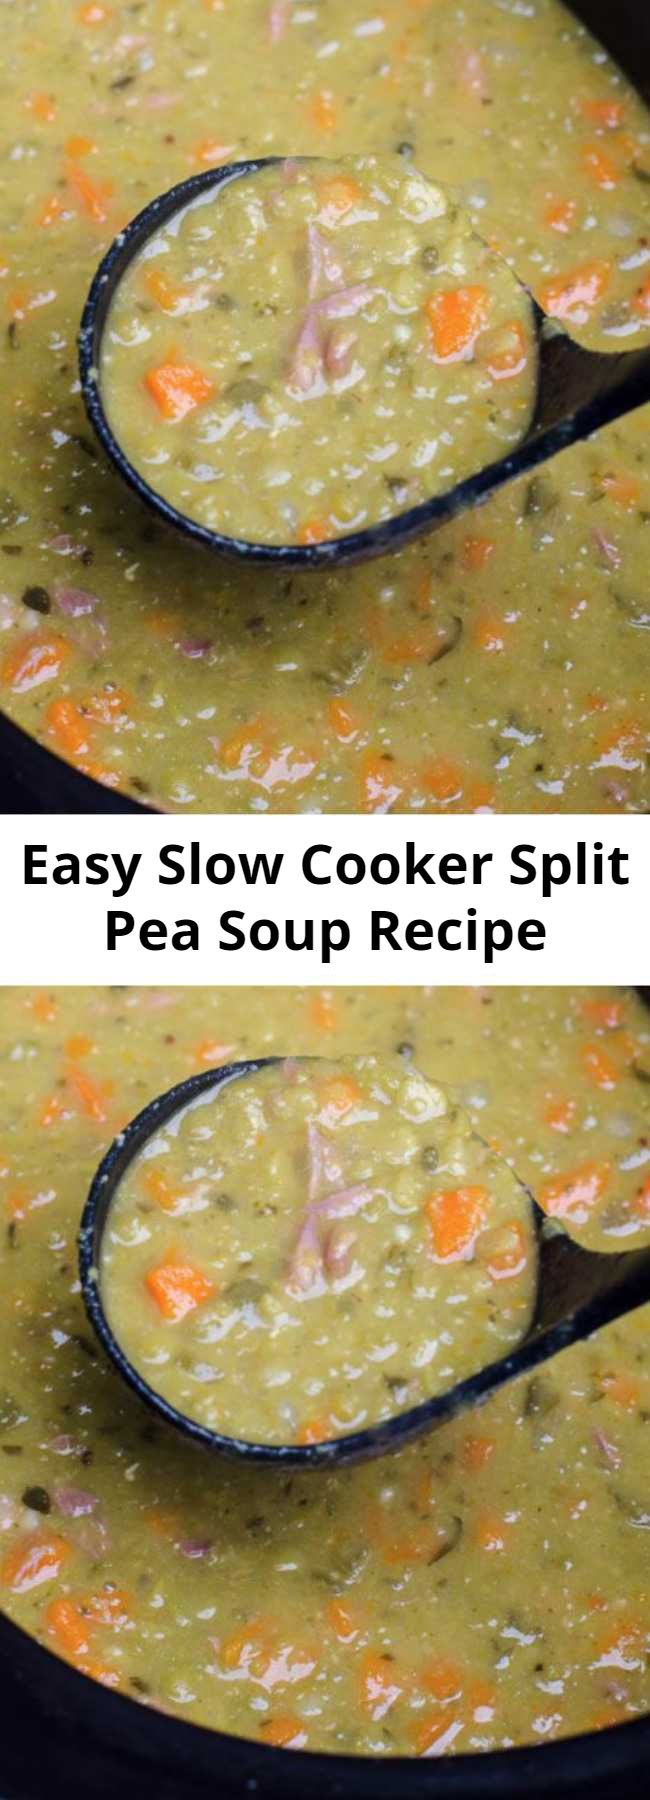 Easy Slow Cooker Split Pea Soup Recipe - Slow Cooker Split Pea Soup is a great way to make use of that leftover bone from your holiday ham. Cooking it low and slow is the best method for creating creamy, delicious split pea soup.